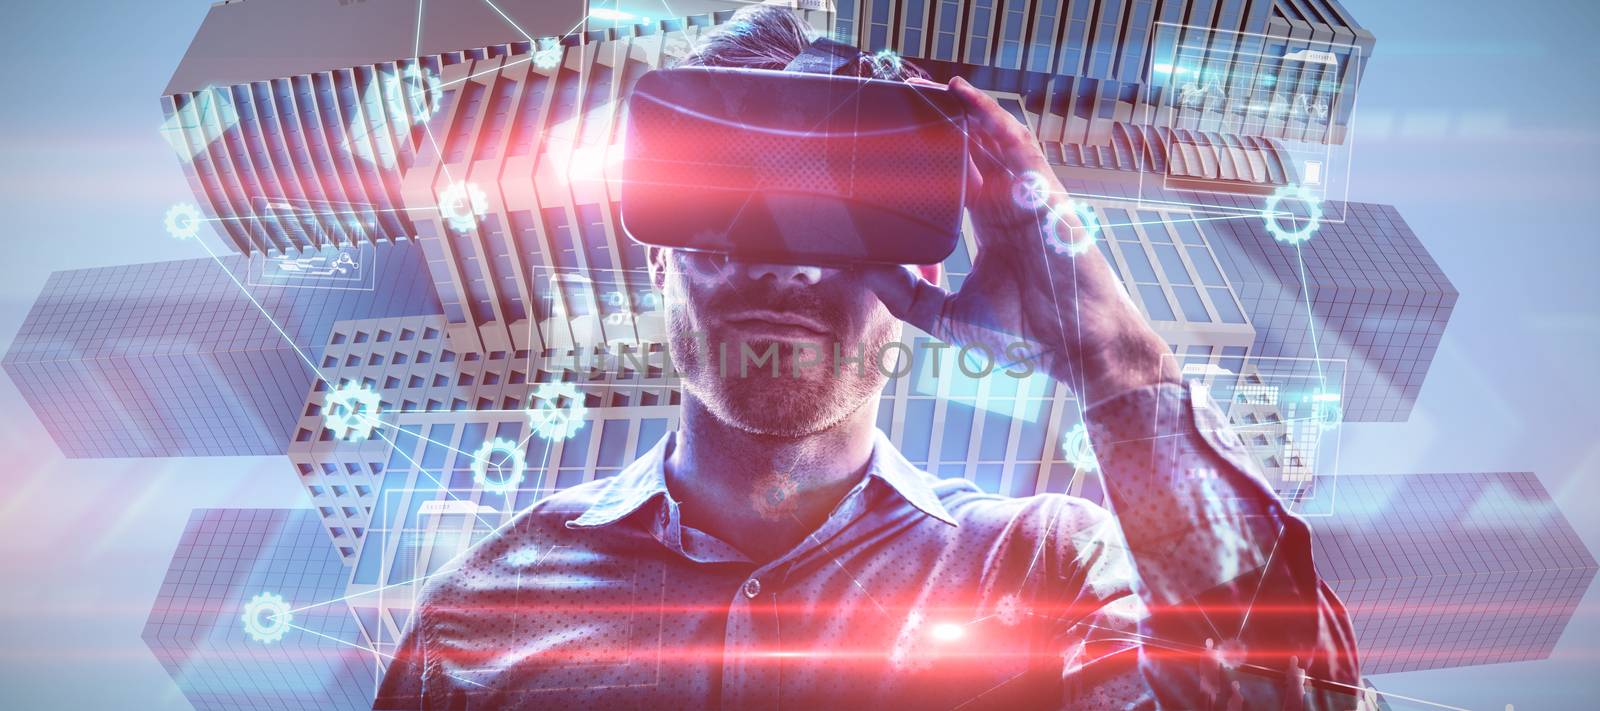 Composite image of man using an oculus by Wavebreakmedia